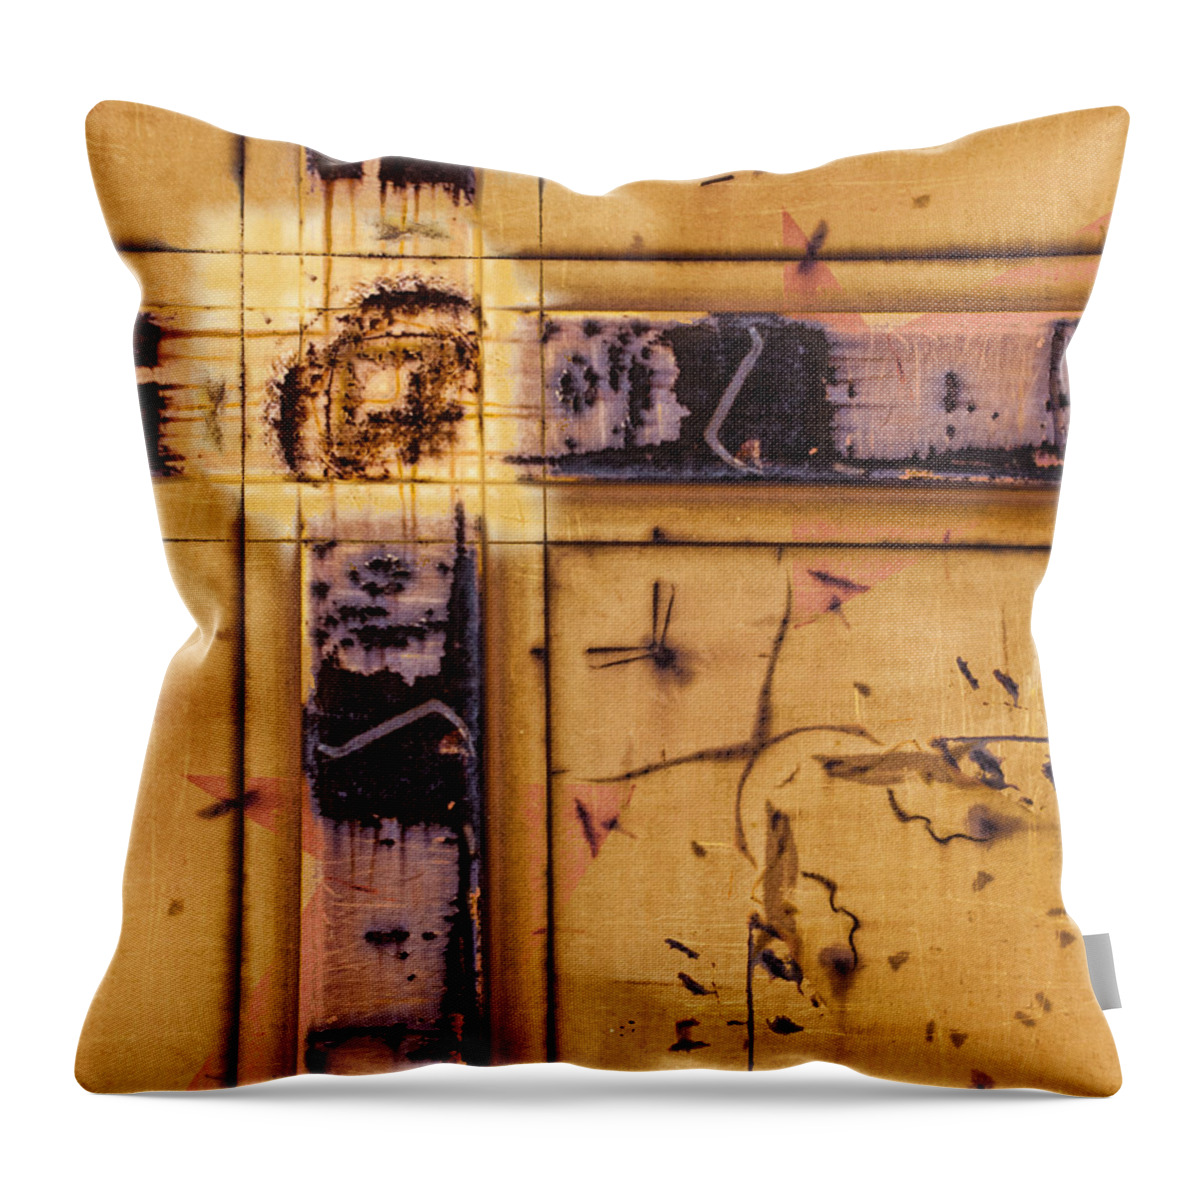 Train Throw Pillow featuring the photograph Train Art Abstract #7 by Carol Leigh